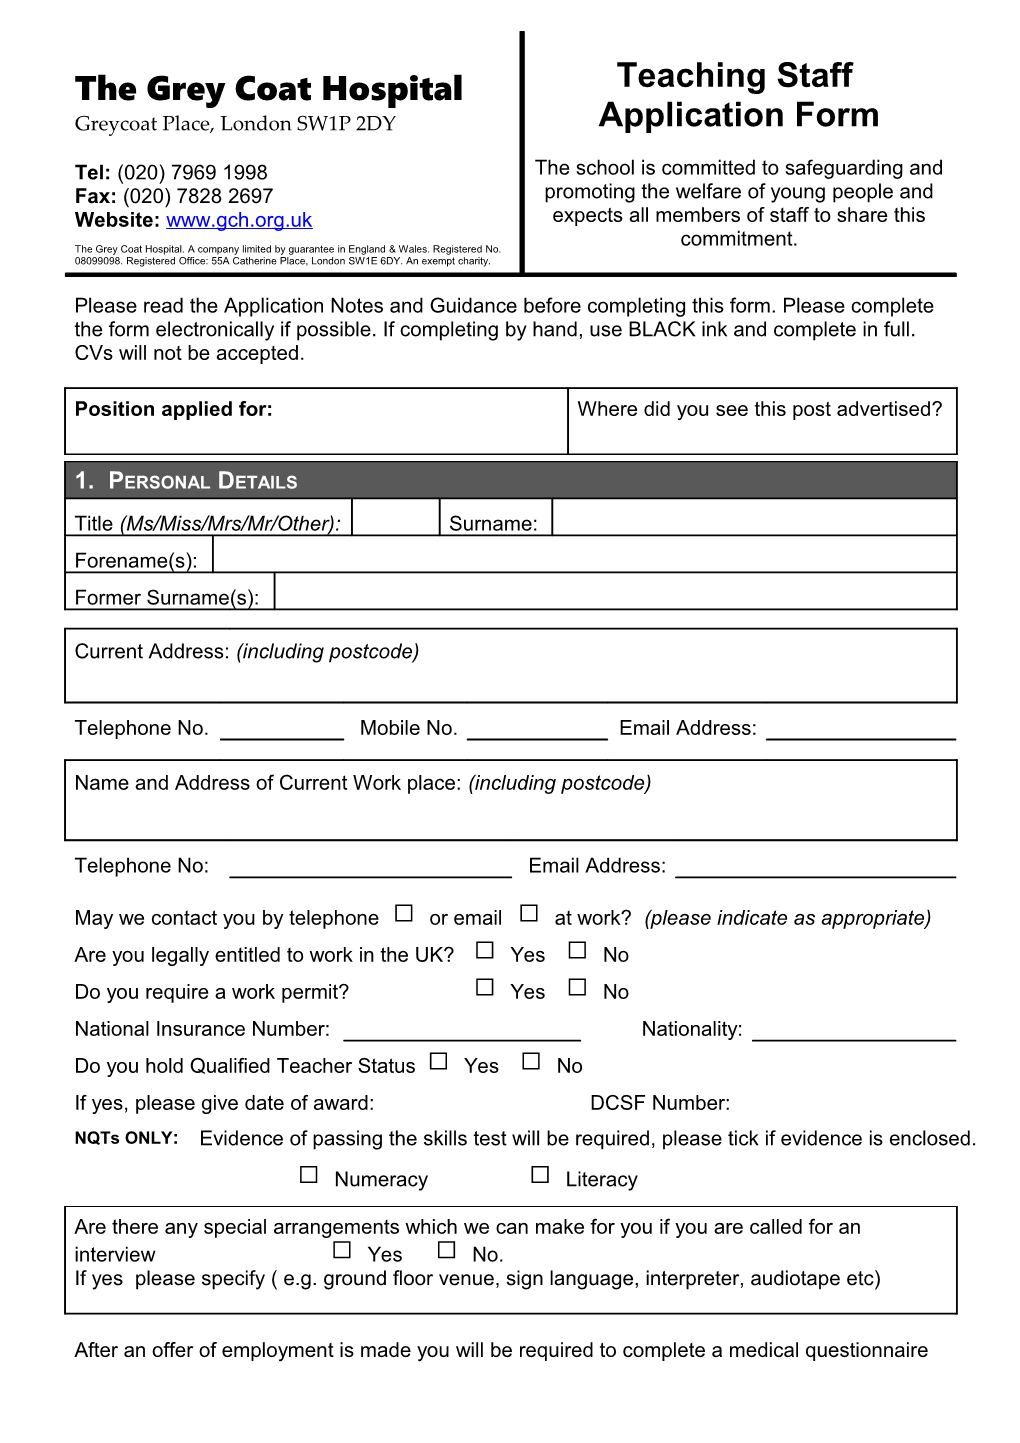 To Be Completed by All Applicants. I Confirm That I Have